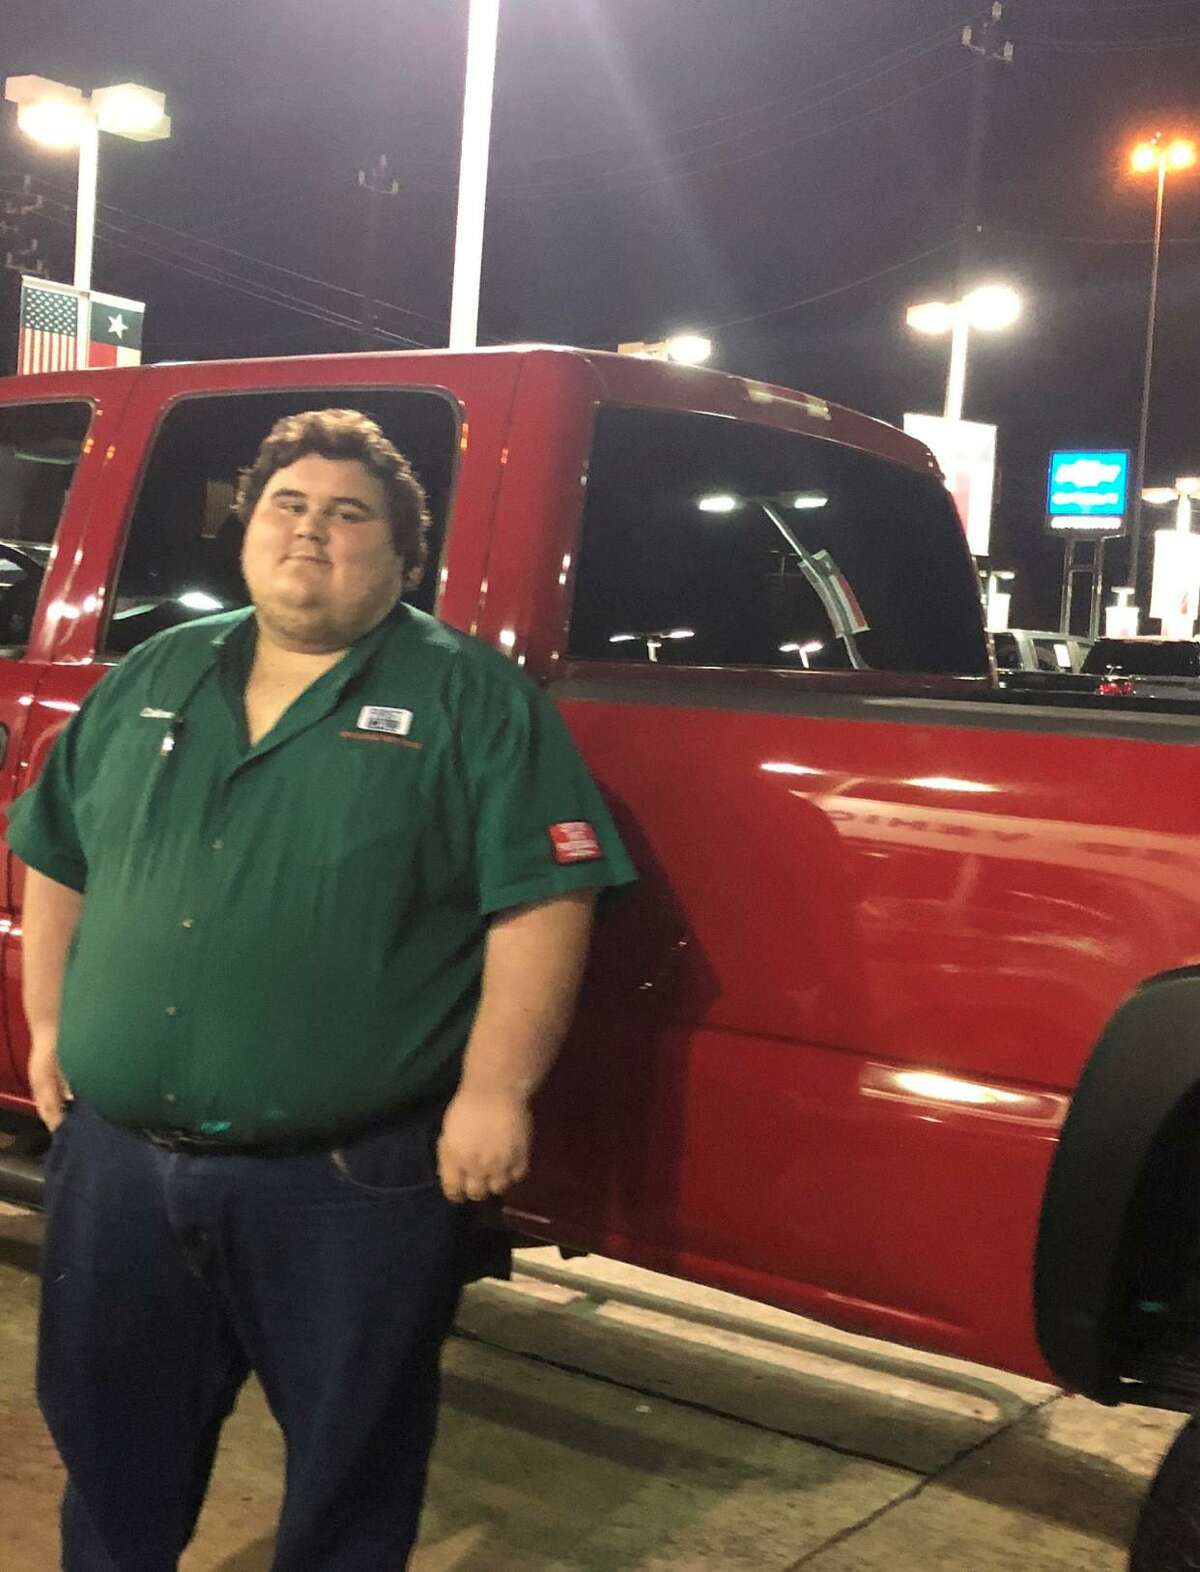 Colton Lowe, of Conroe, bought a mustang as a project car -- and his first goal was to get it running again. But when he got in to drive it, he could barely fit. Now, he's lost weight, and improved his dream car.